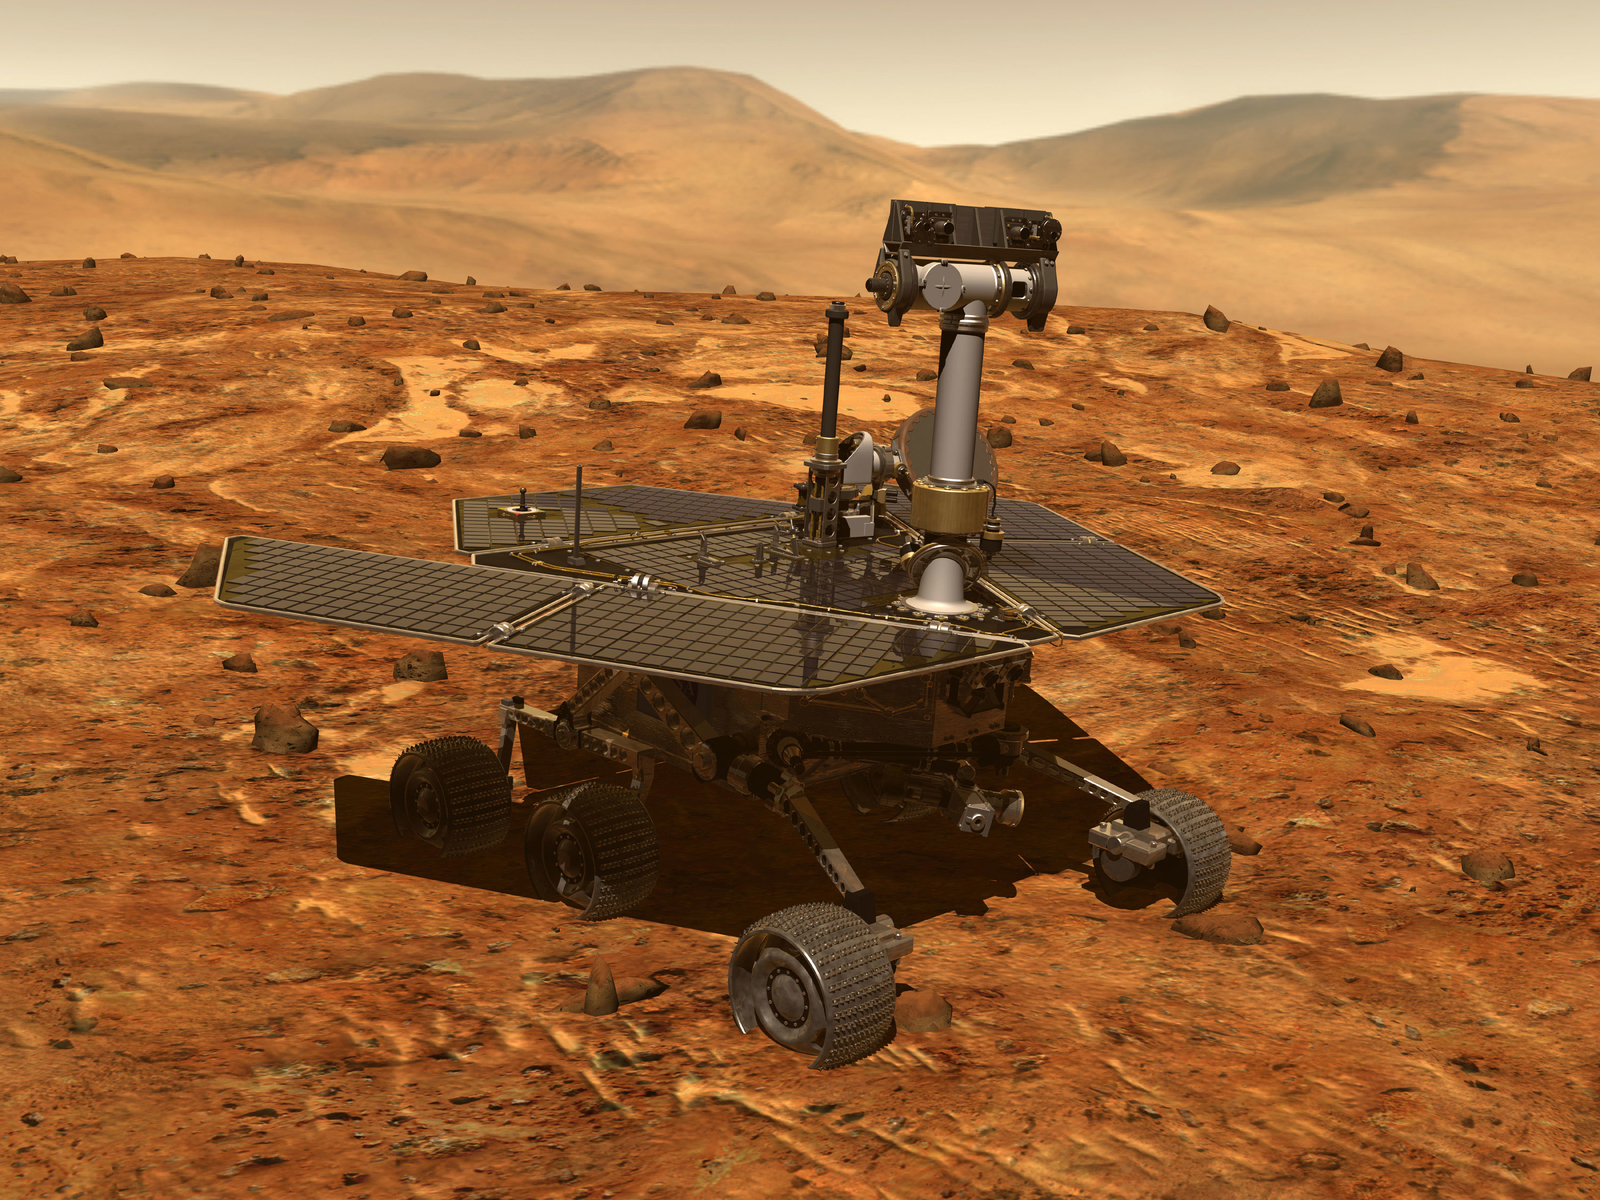 NASA's twin robot geologists, the Mars Exploration Rovers, will launch toward Mars in 2003 in search of answers about the history of water on Mars. The rovers will be targeted to sites that appear to have been affected by liquid water in the past. They will drive to various locations to perform on-site scientific investigations over the course of their 90-day missions. This mission is part of NASA's long-term effort of robotic exploration of the red planet. For more information, please visit our website at: http://mars.jpl.nasa.gov/mer/